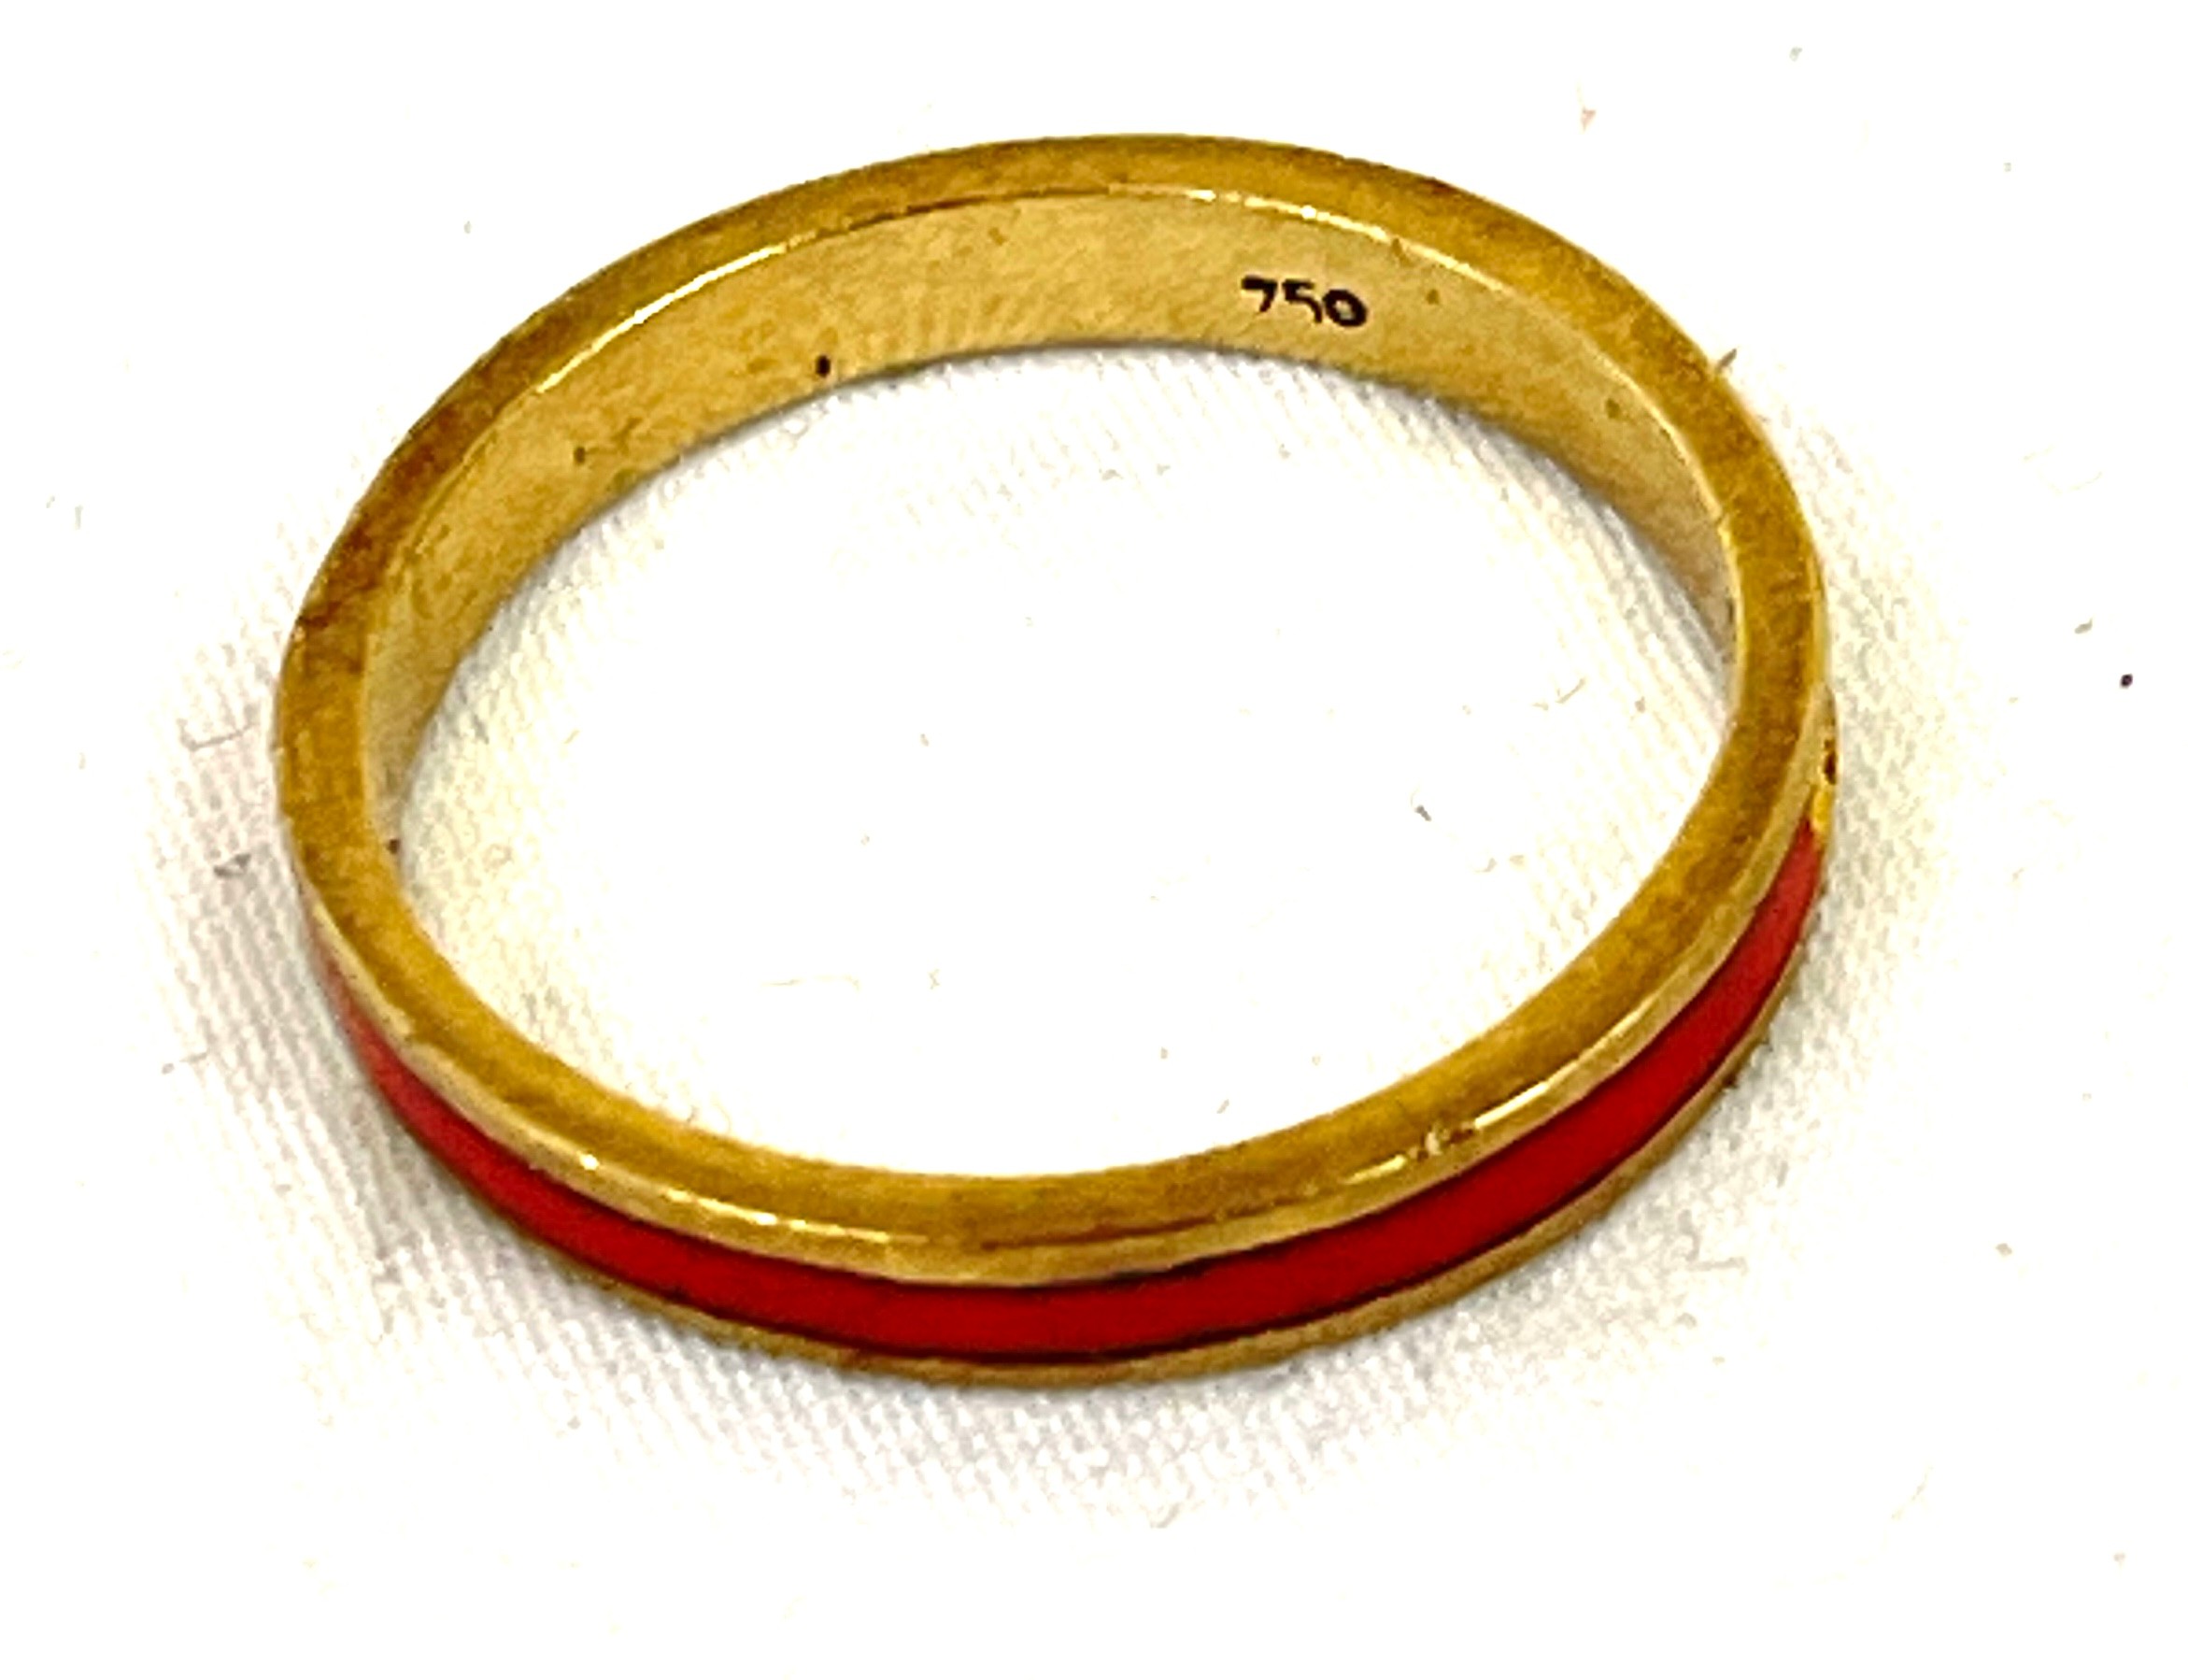 18ct gold hallmarked enamel band, damage to enamel as seen in image, approximate weight: 2.8g - Image 4 of 4